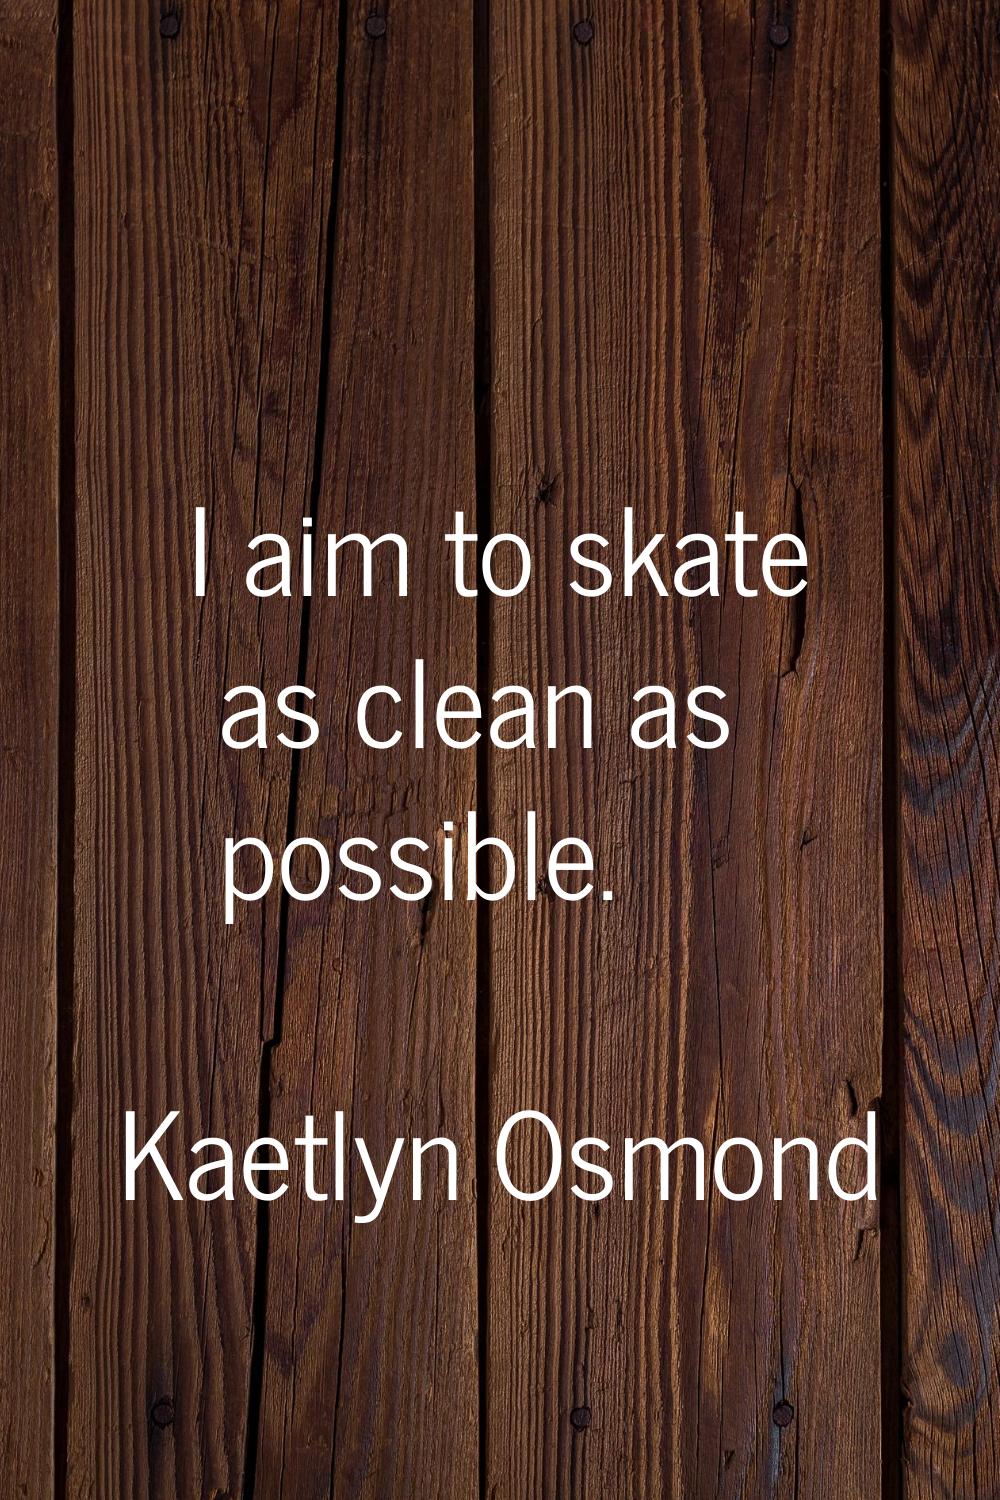 I aim to skate as clean as possible.